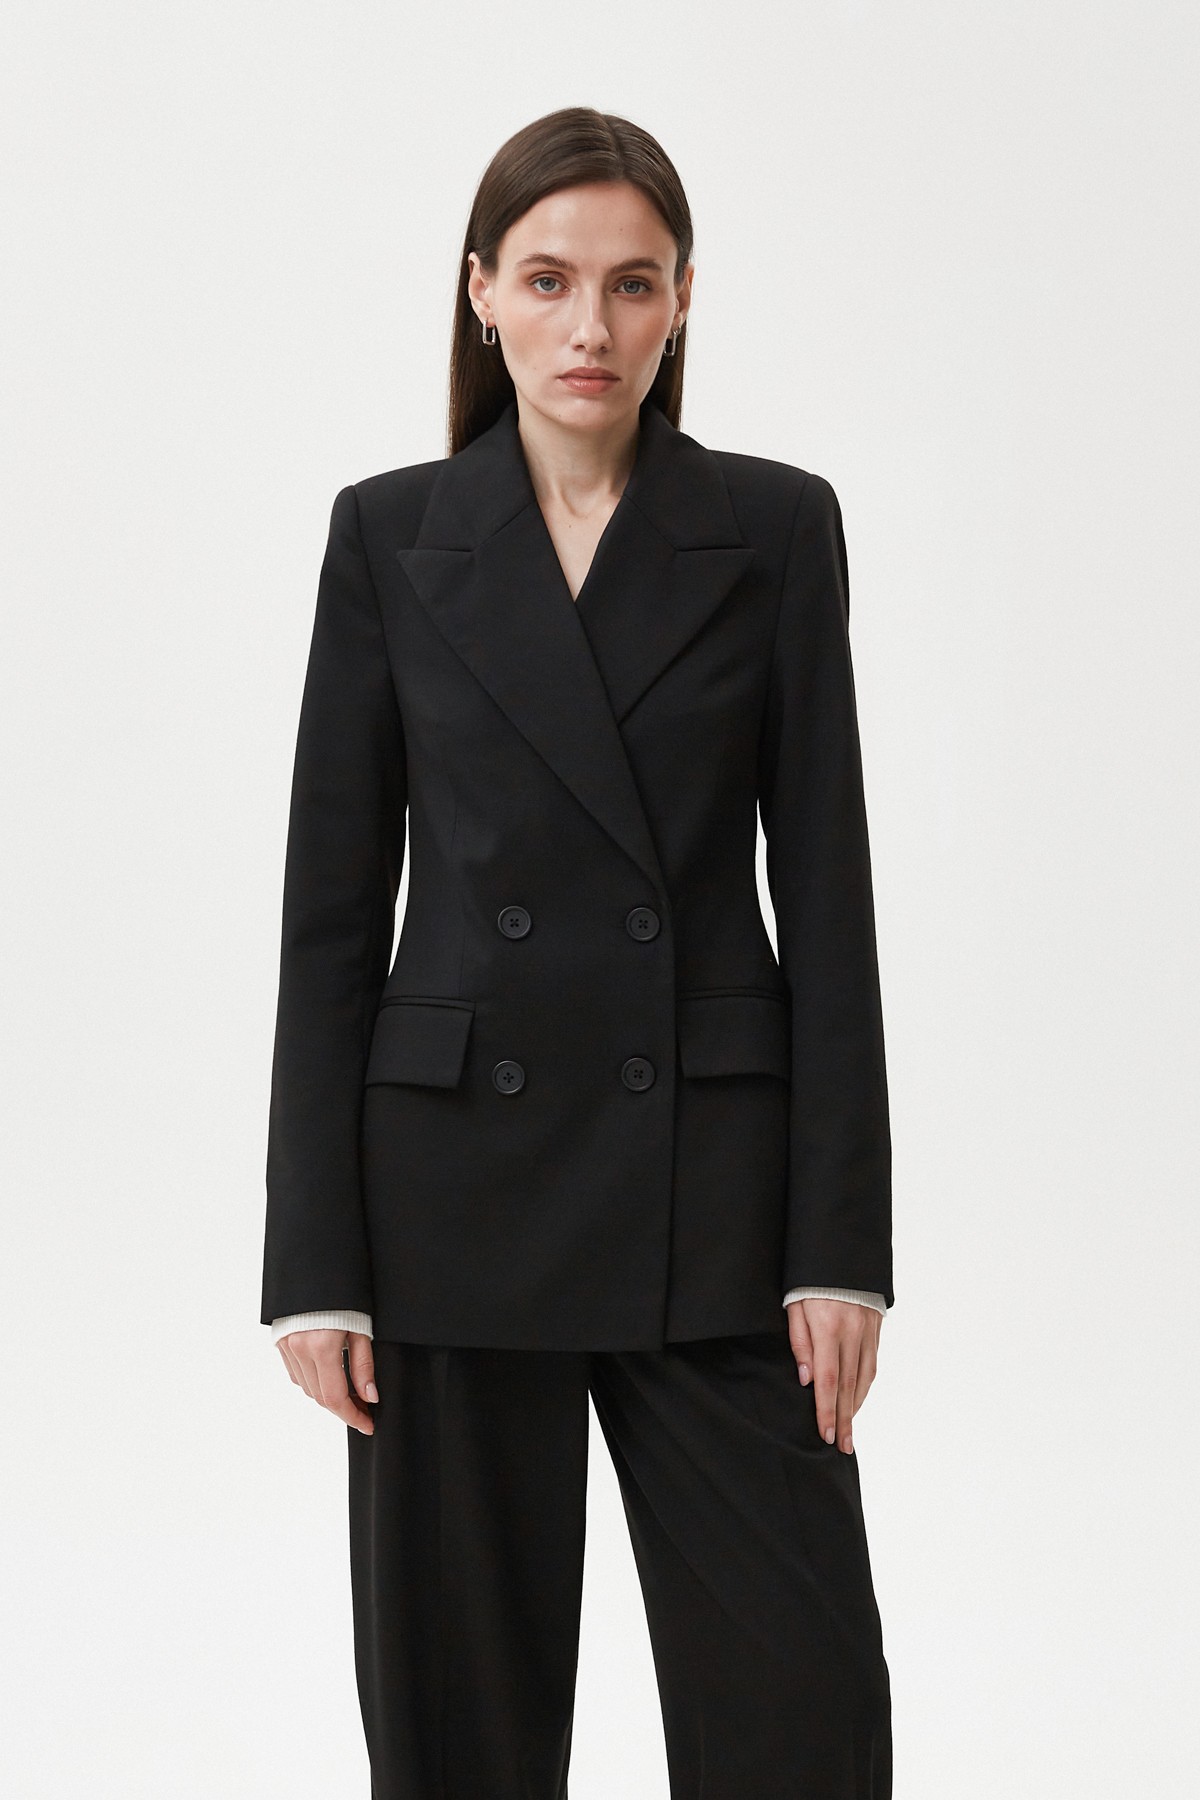 Black double-breasted jacket made of viscose suit fabric